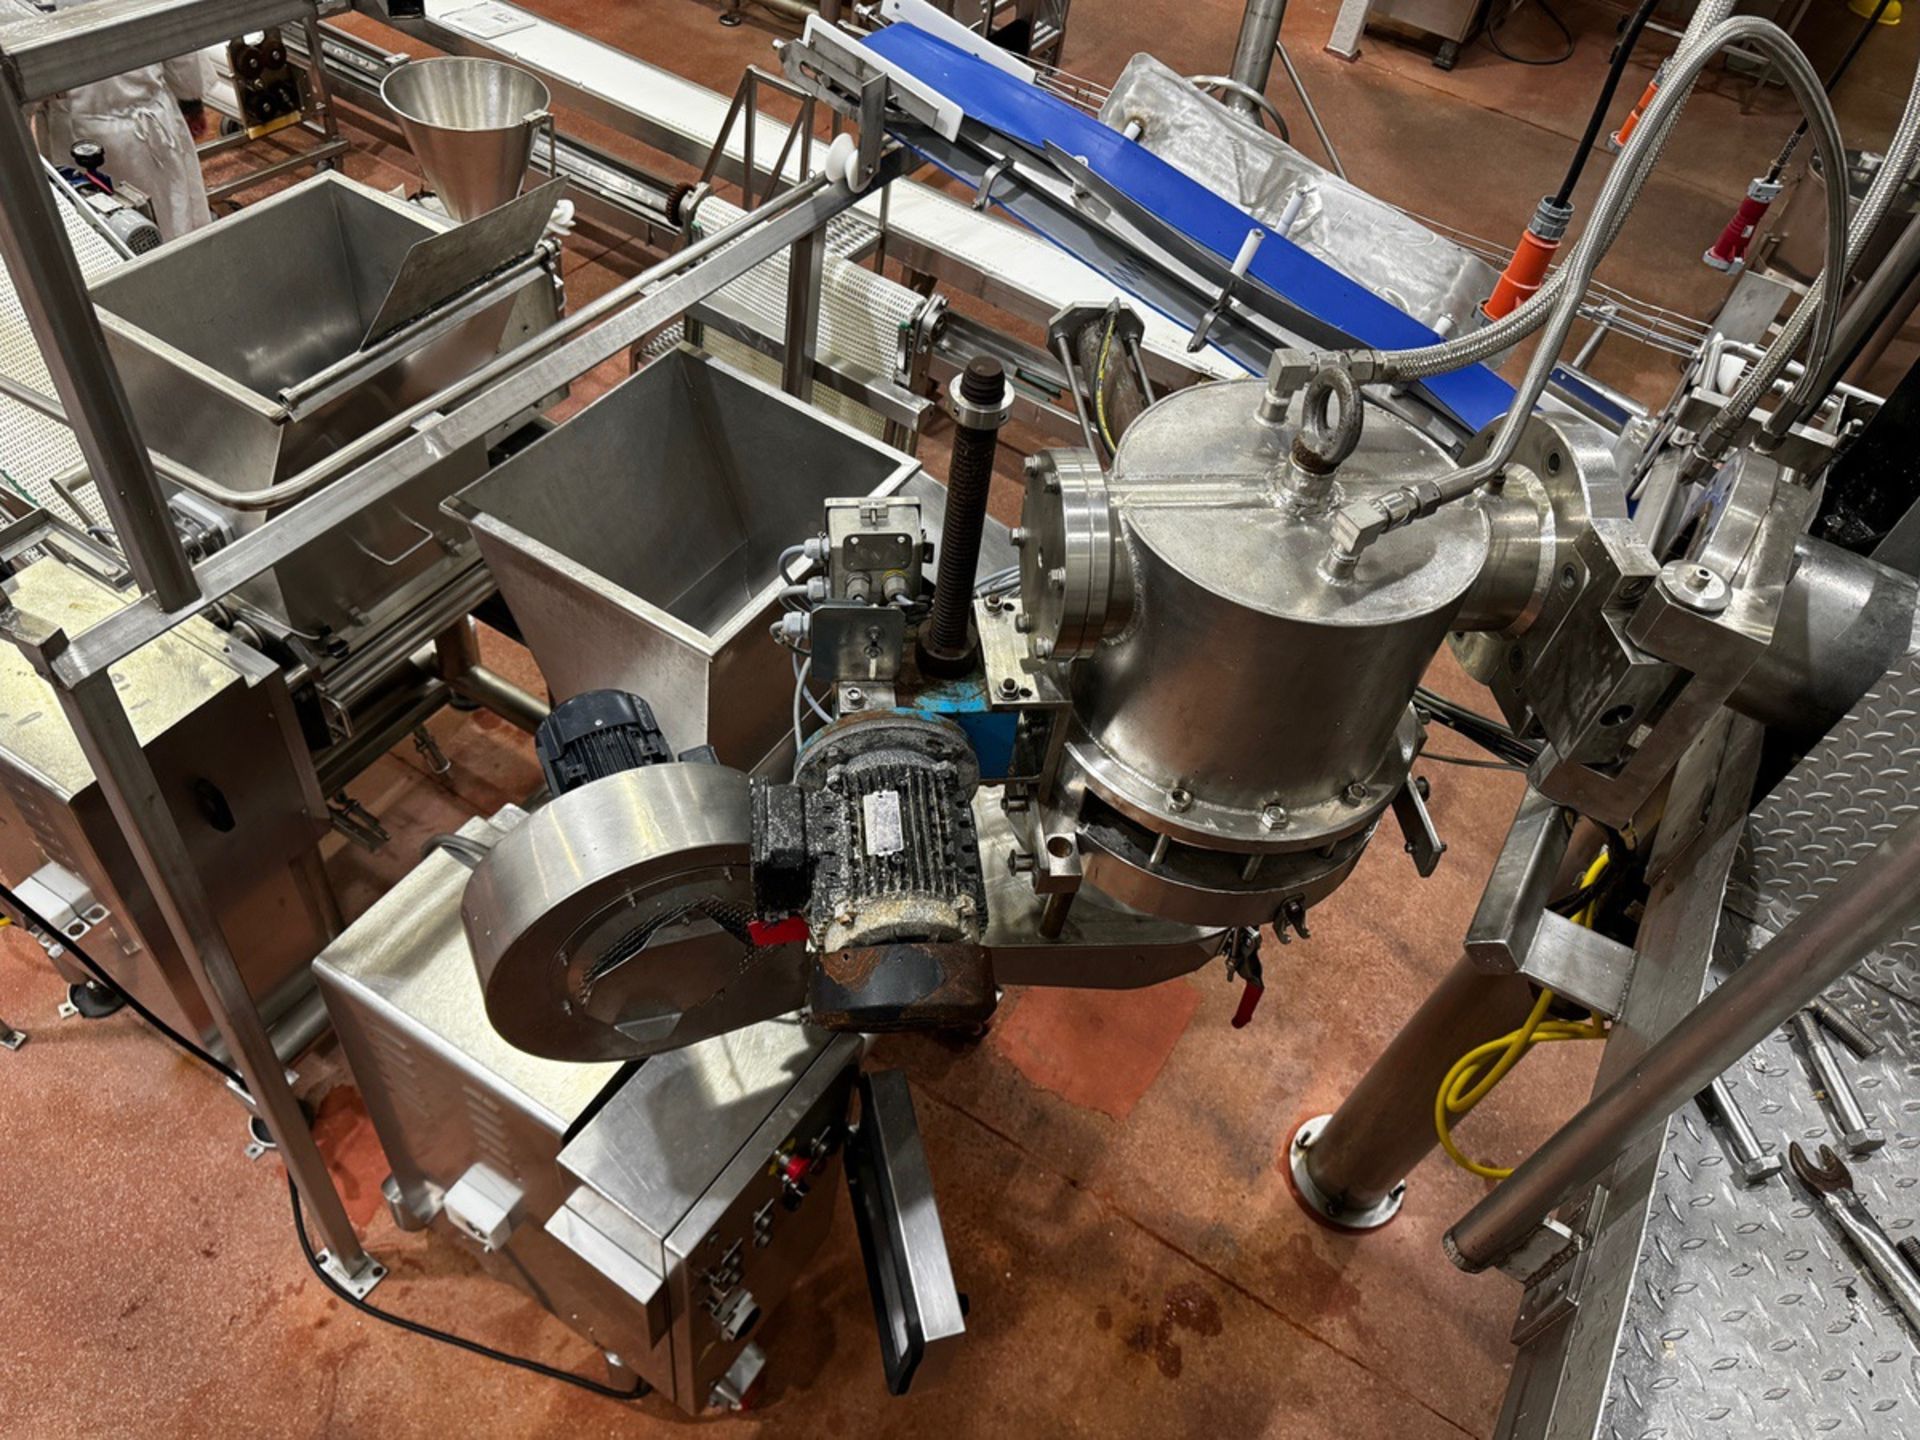 Stainless Single Grim Continuous Mixer, Pasta Press / Extruder, Cutter, Ingredient Receiving, Meteri - Image 5 of 6